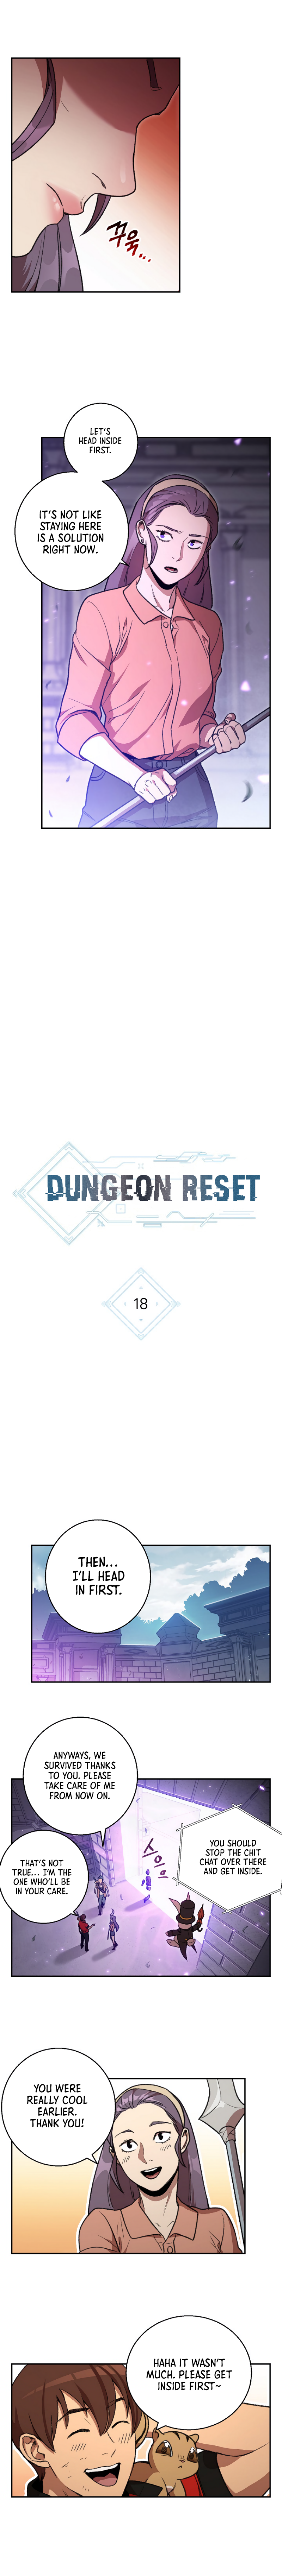 Dungeon Reset - Page 3